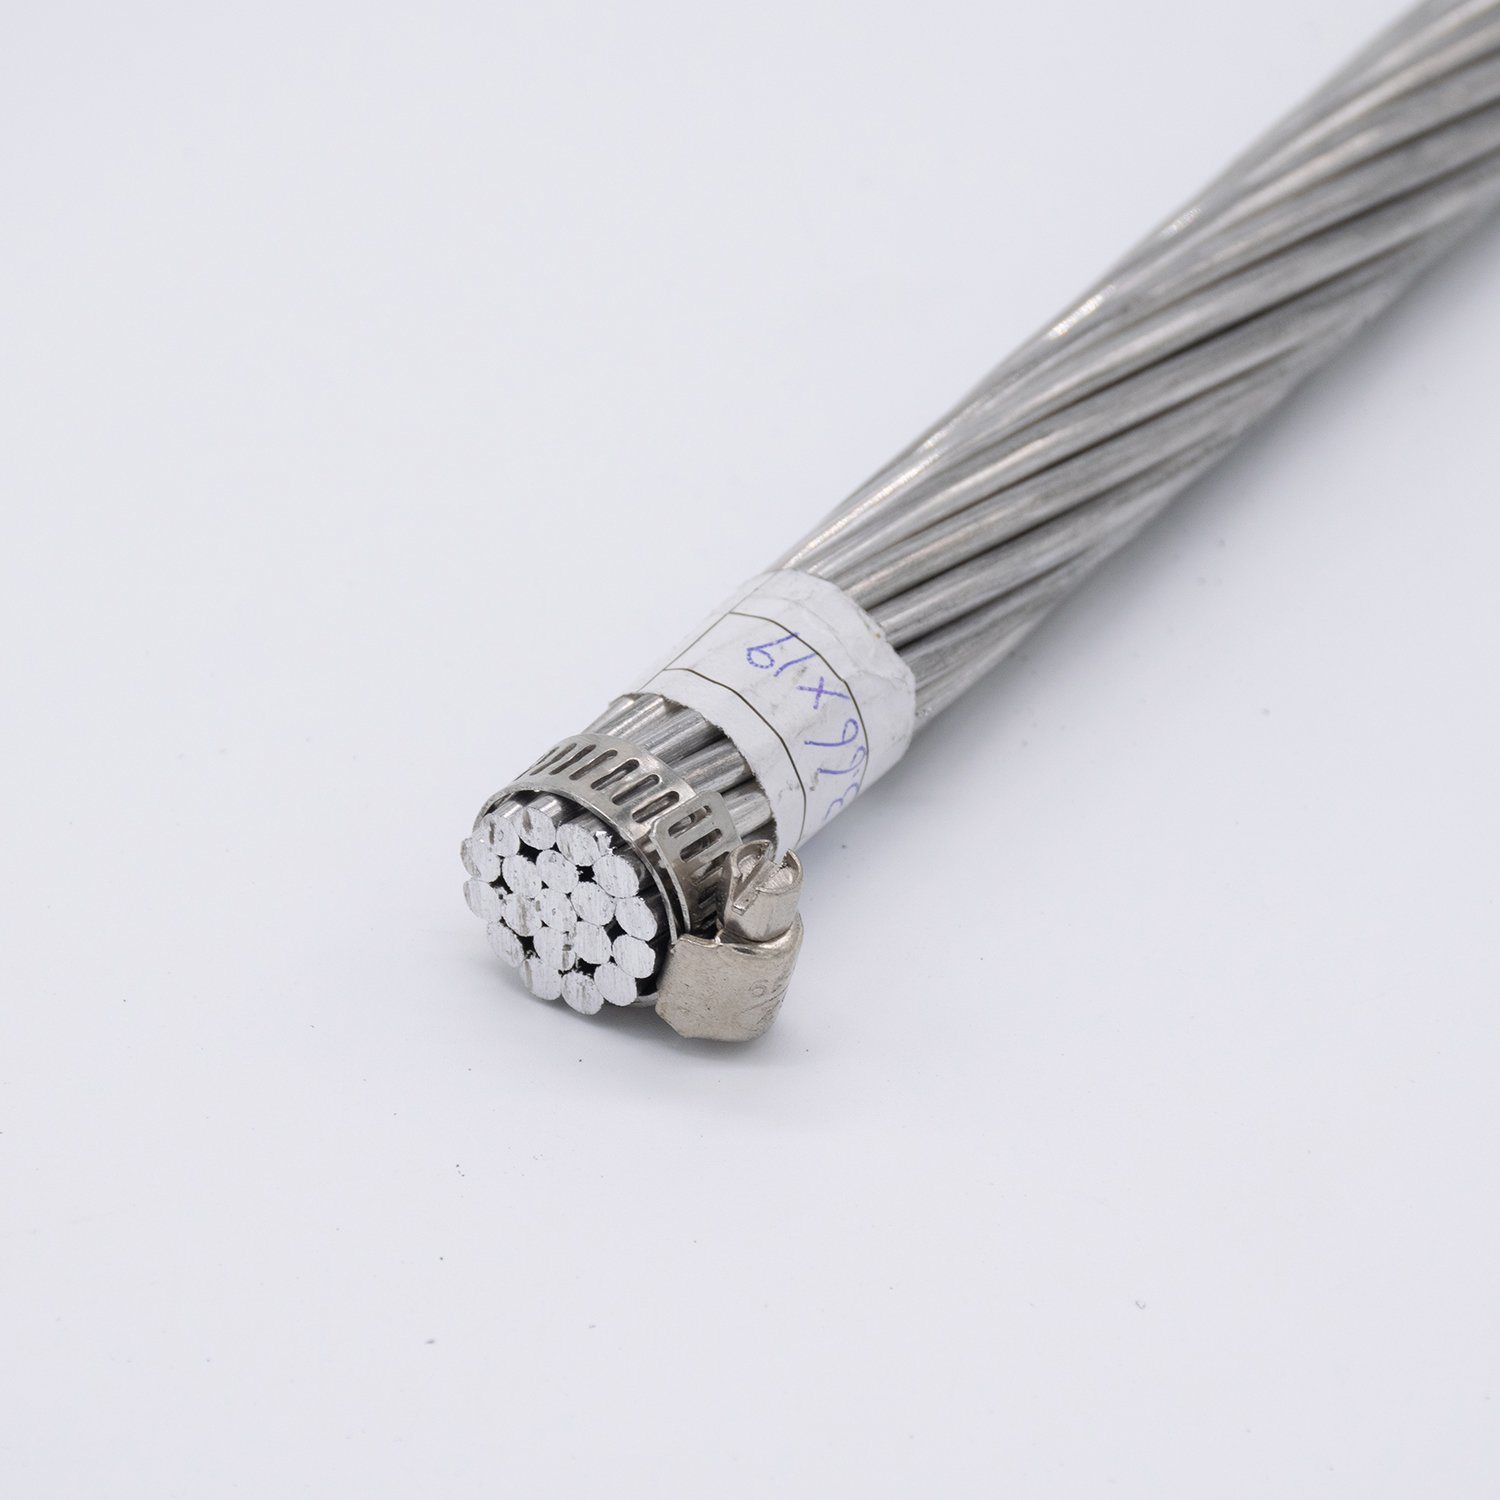 AAC Standard Jade 7/4.50 AAAC All Aluminum Alloy Bare Conductor High Quality